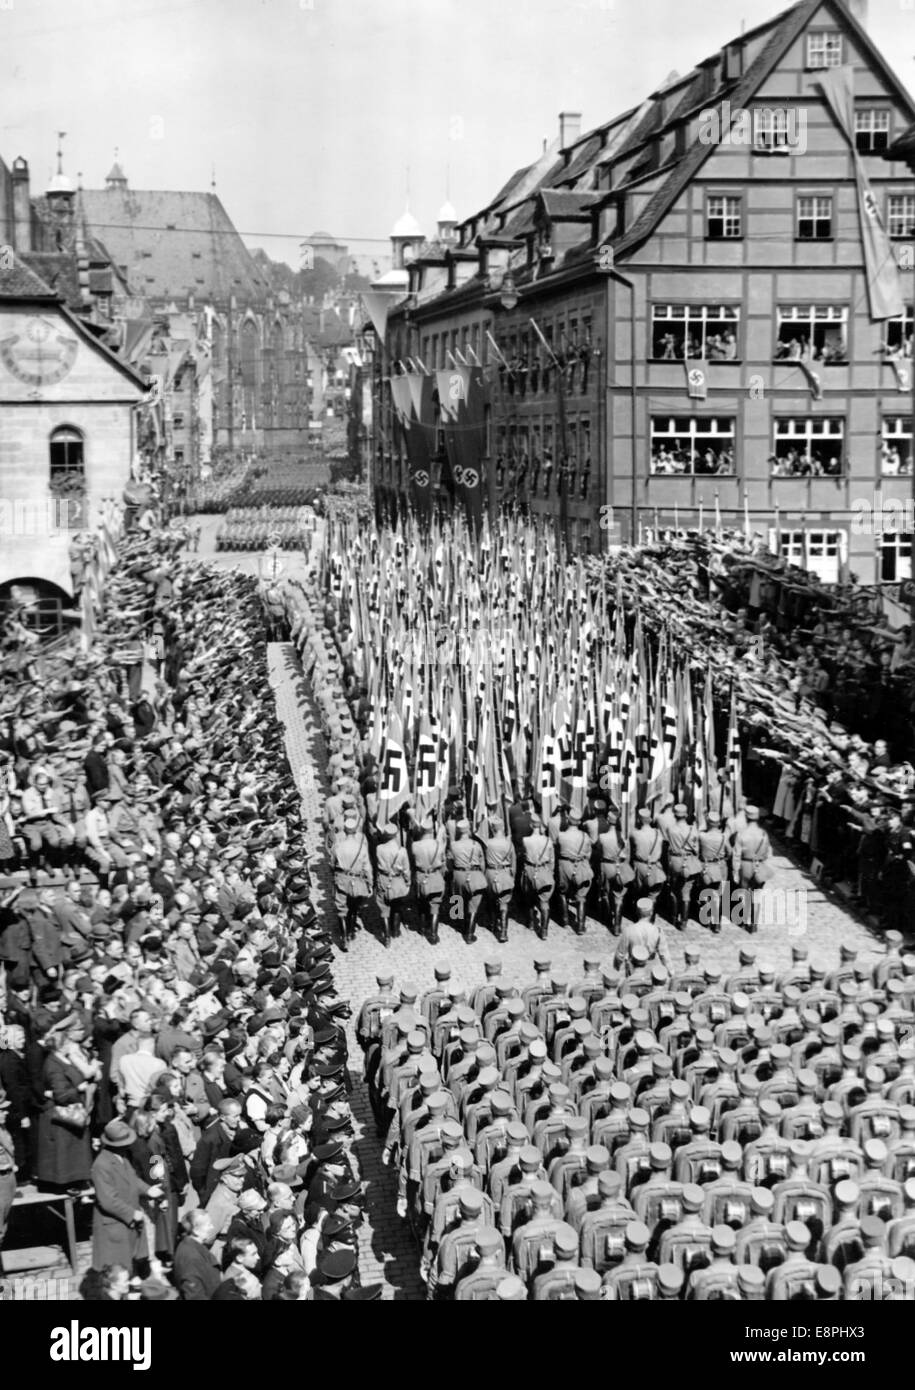 Nuremberg Rally 1938 in Nuremberg, Germany - Members of the Sturmabteilung (SA) march past houses decorated with wreaths and swastikas across Fleisch Bridge and are greeted with the Nazi salute in Nuremberg. (Flaws in quality due to the historic picture copy) Fotoarchiv für Zeitgeschichtee - NO WIRE SERVICE - Stock Photo